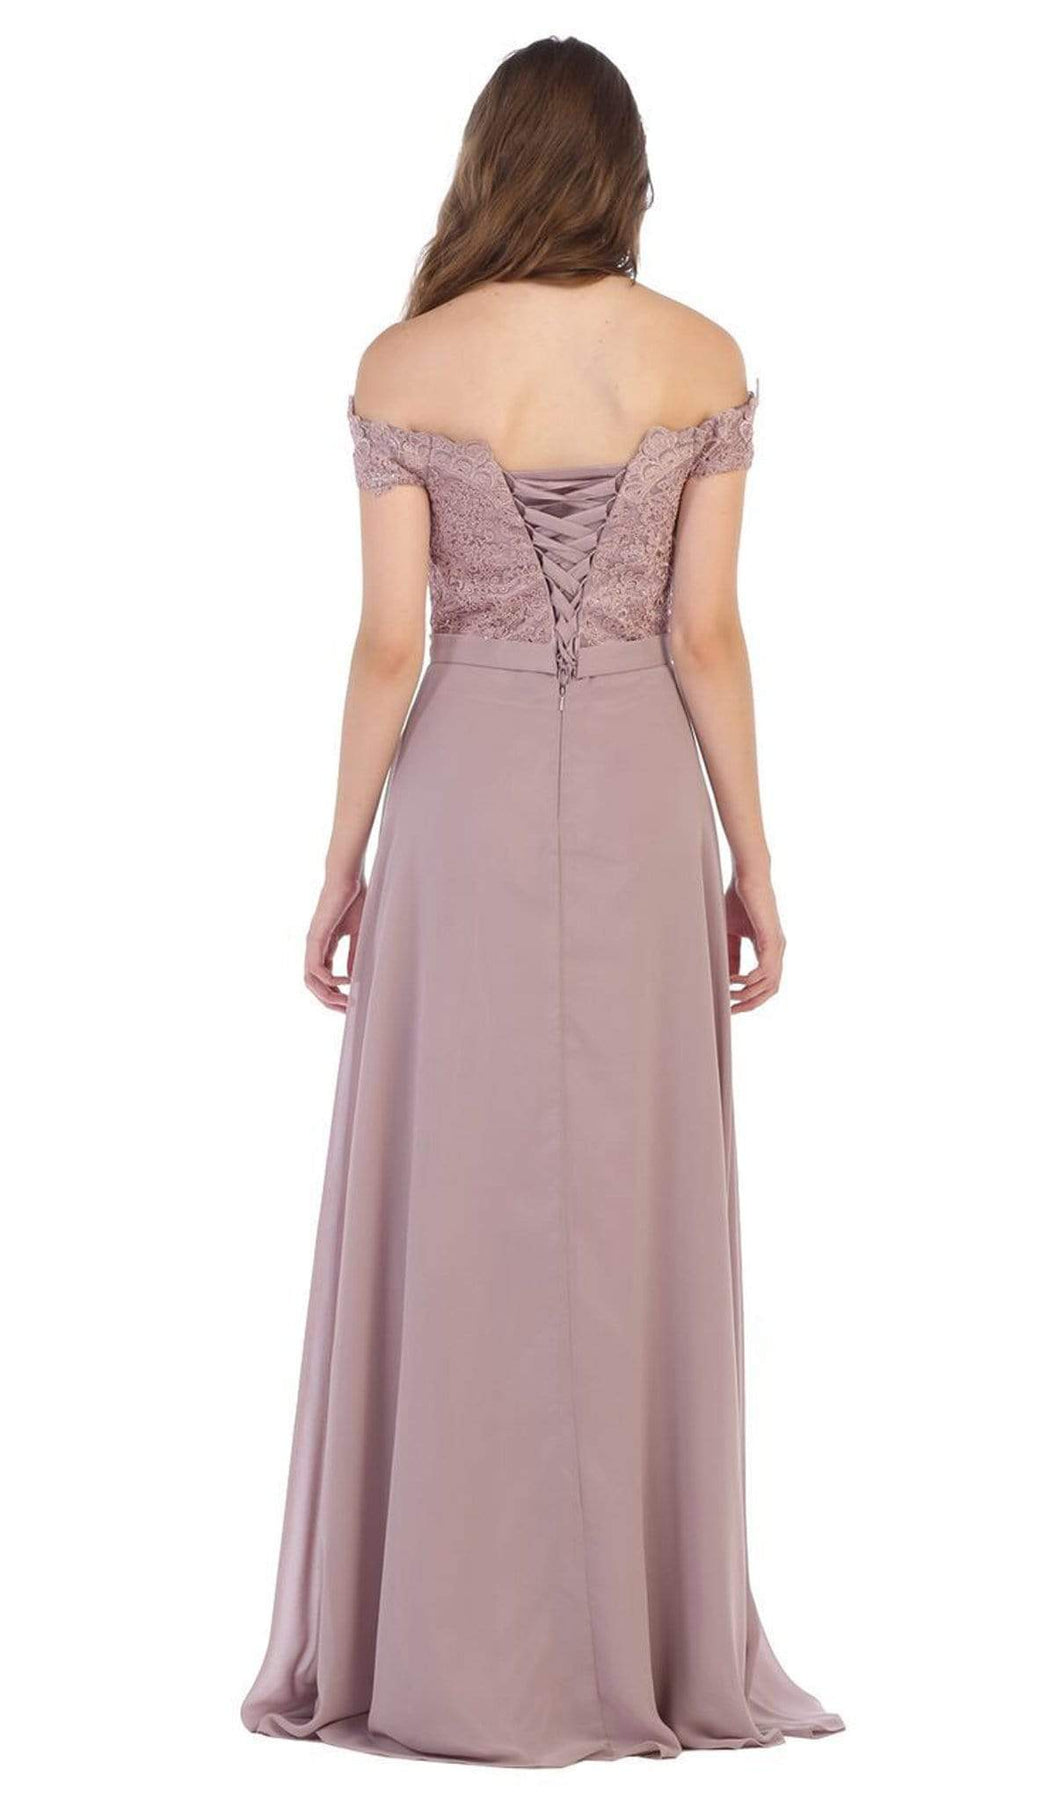 May Queen - MQ1601 Lace Appliqued Chiffon Off Shoulder Formal Gown Bridesmaid Dresses